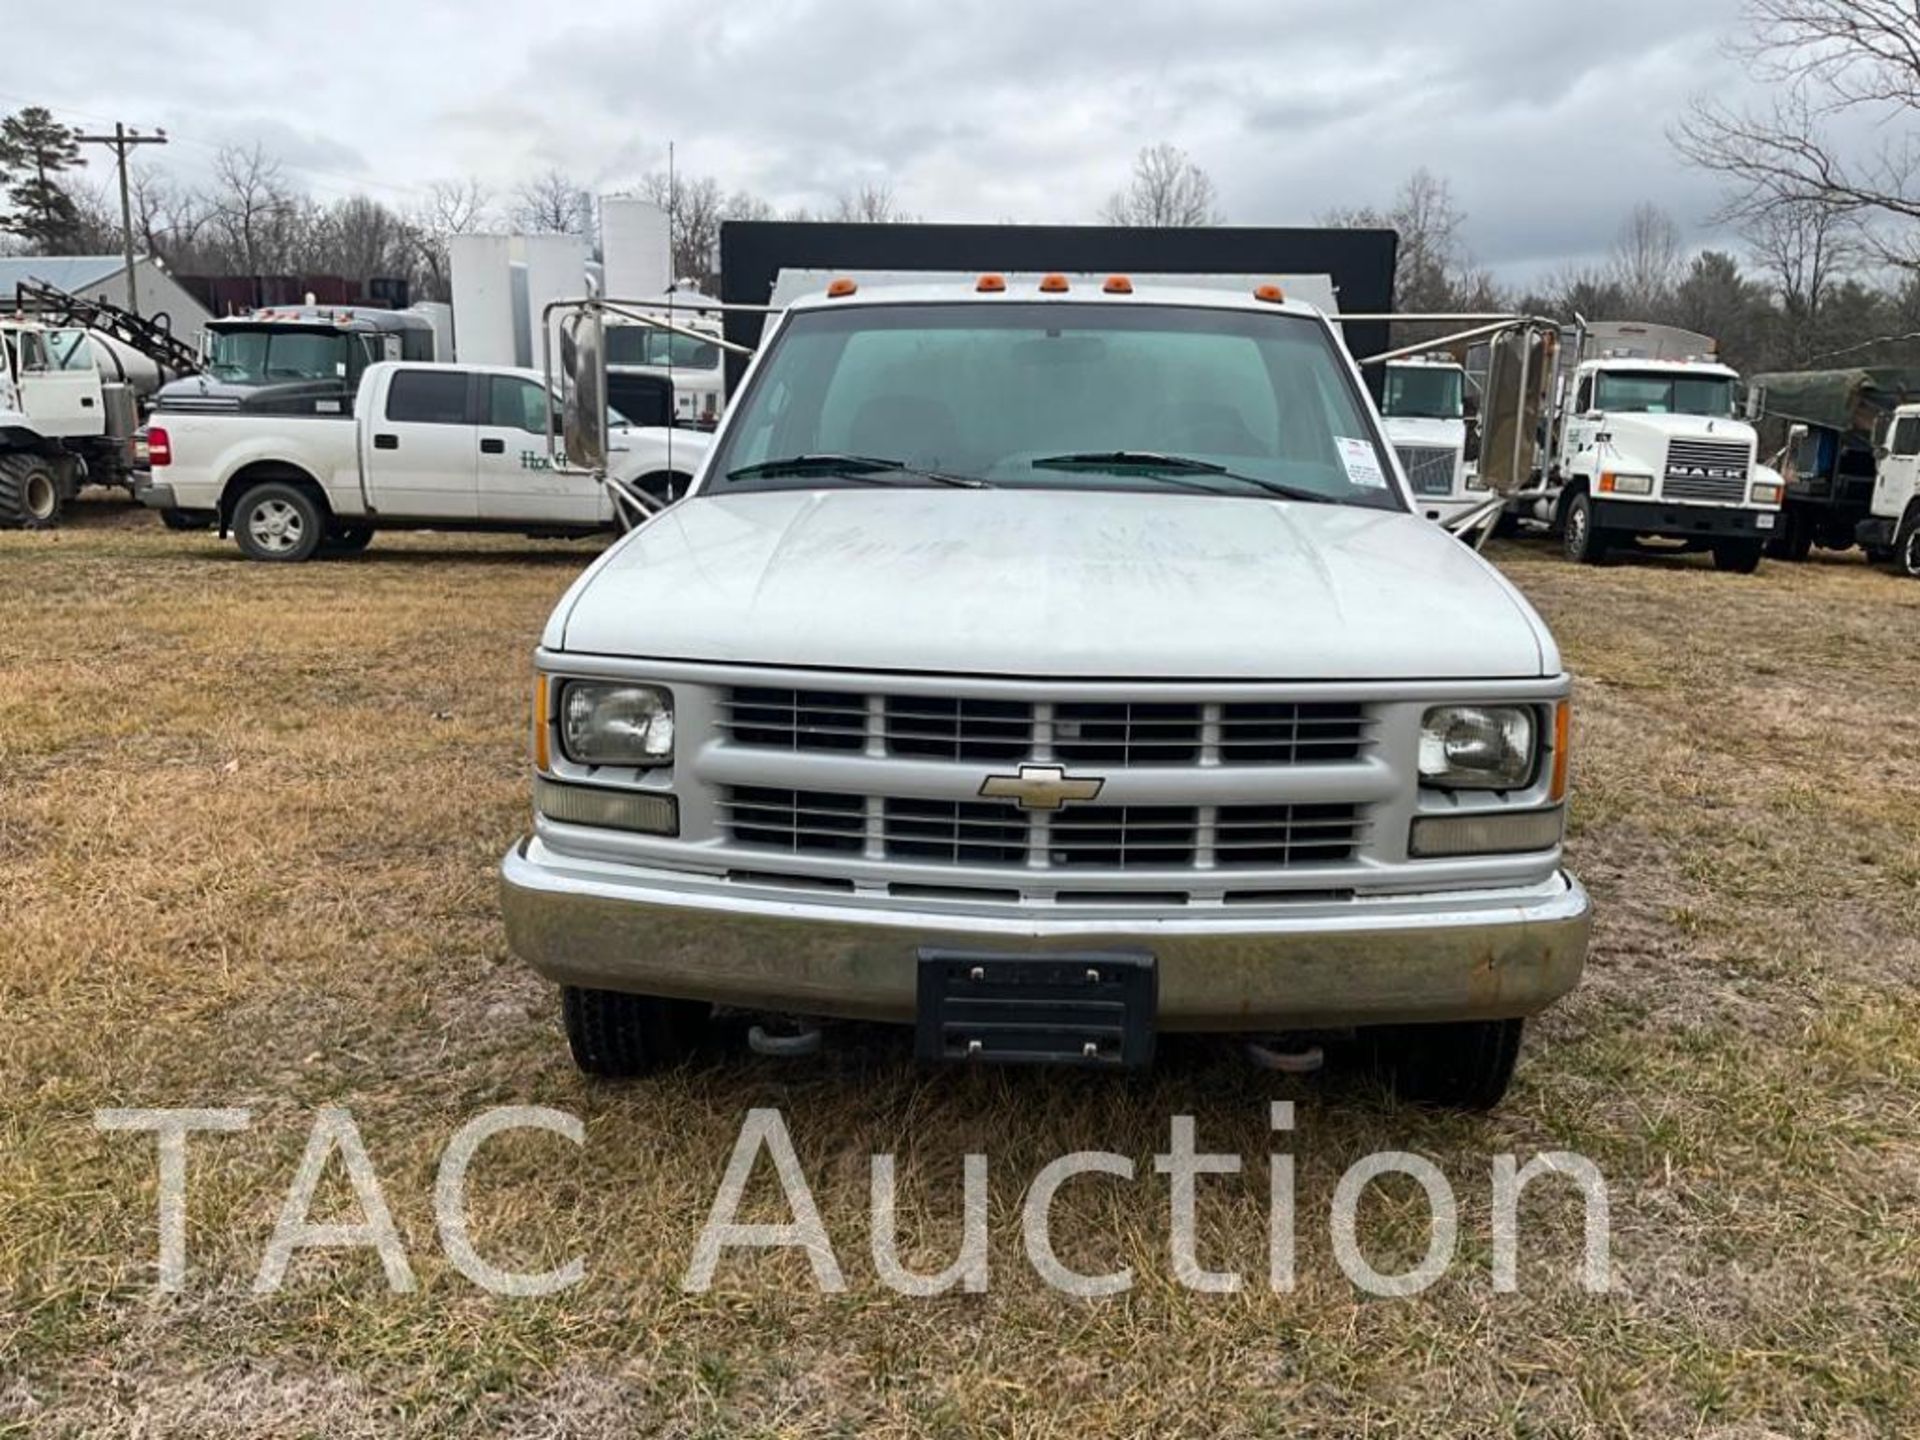 1995 Chevrolet C3500 Flatbed Truck - Image 8 of 42